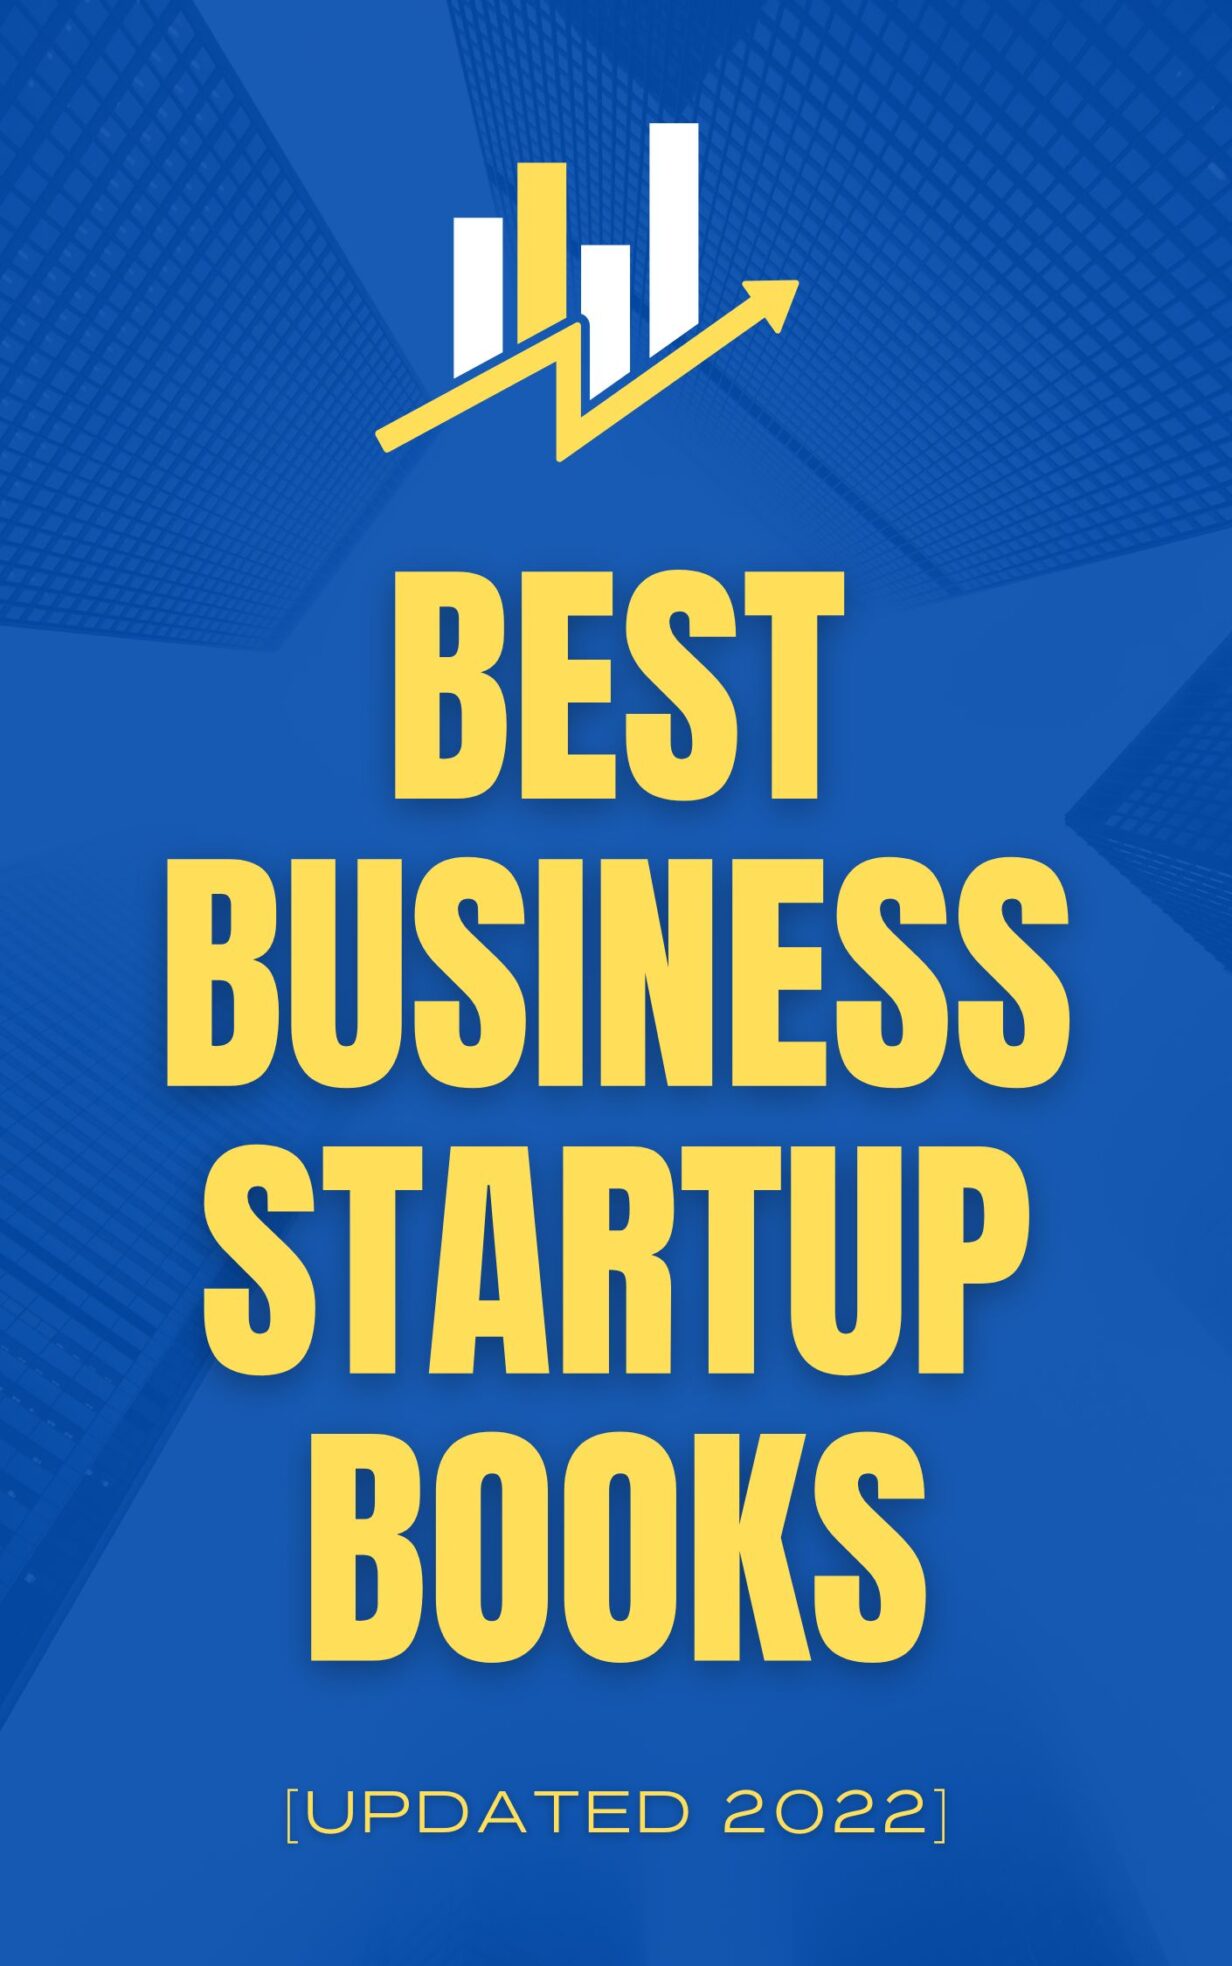 Best Business Startup Books - Reagan T. Pollack